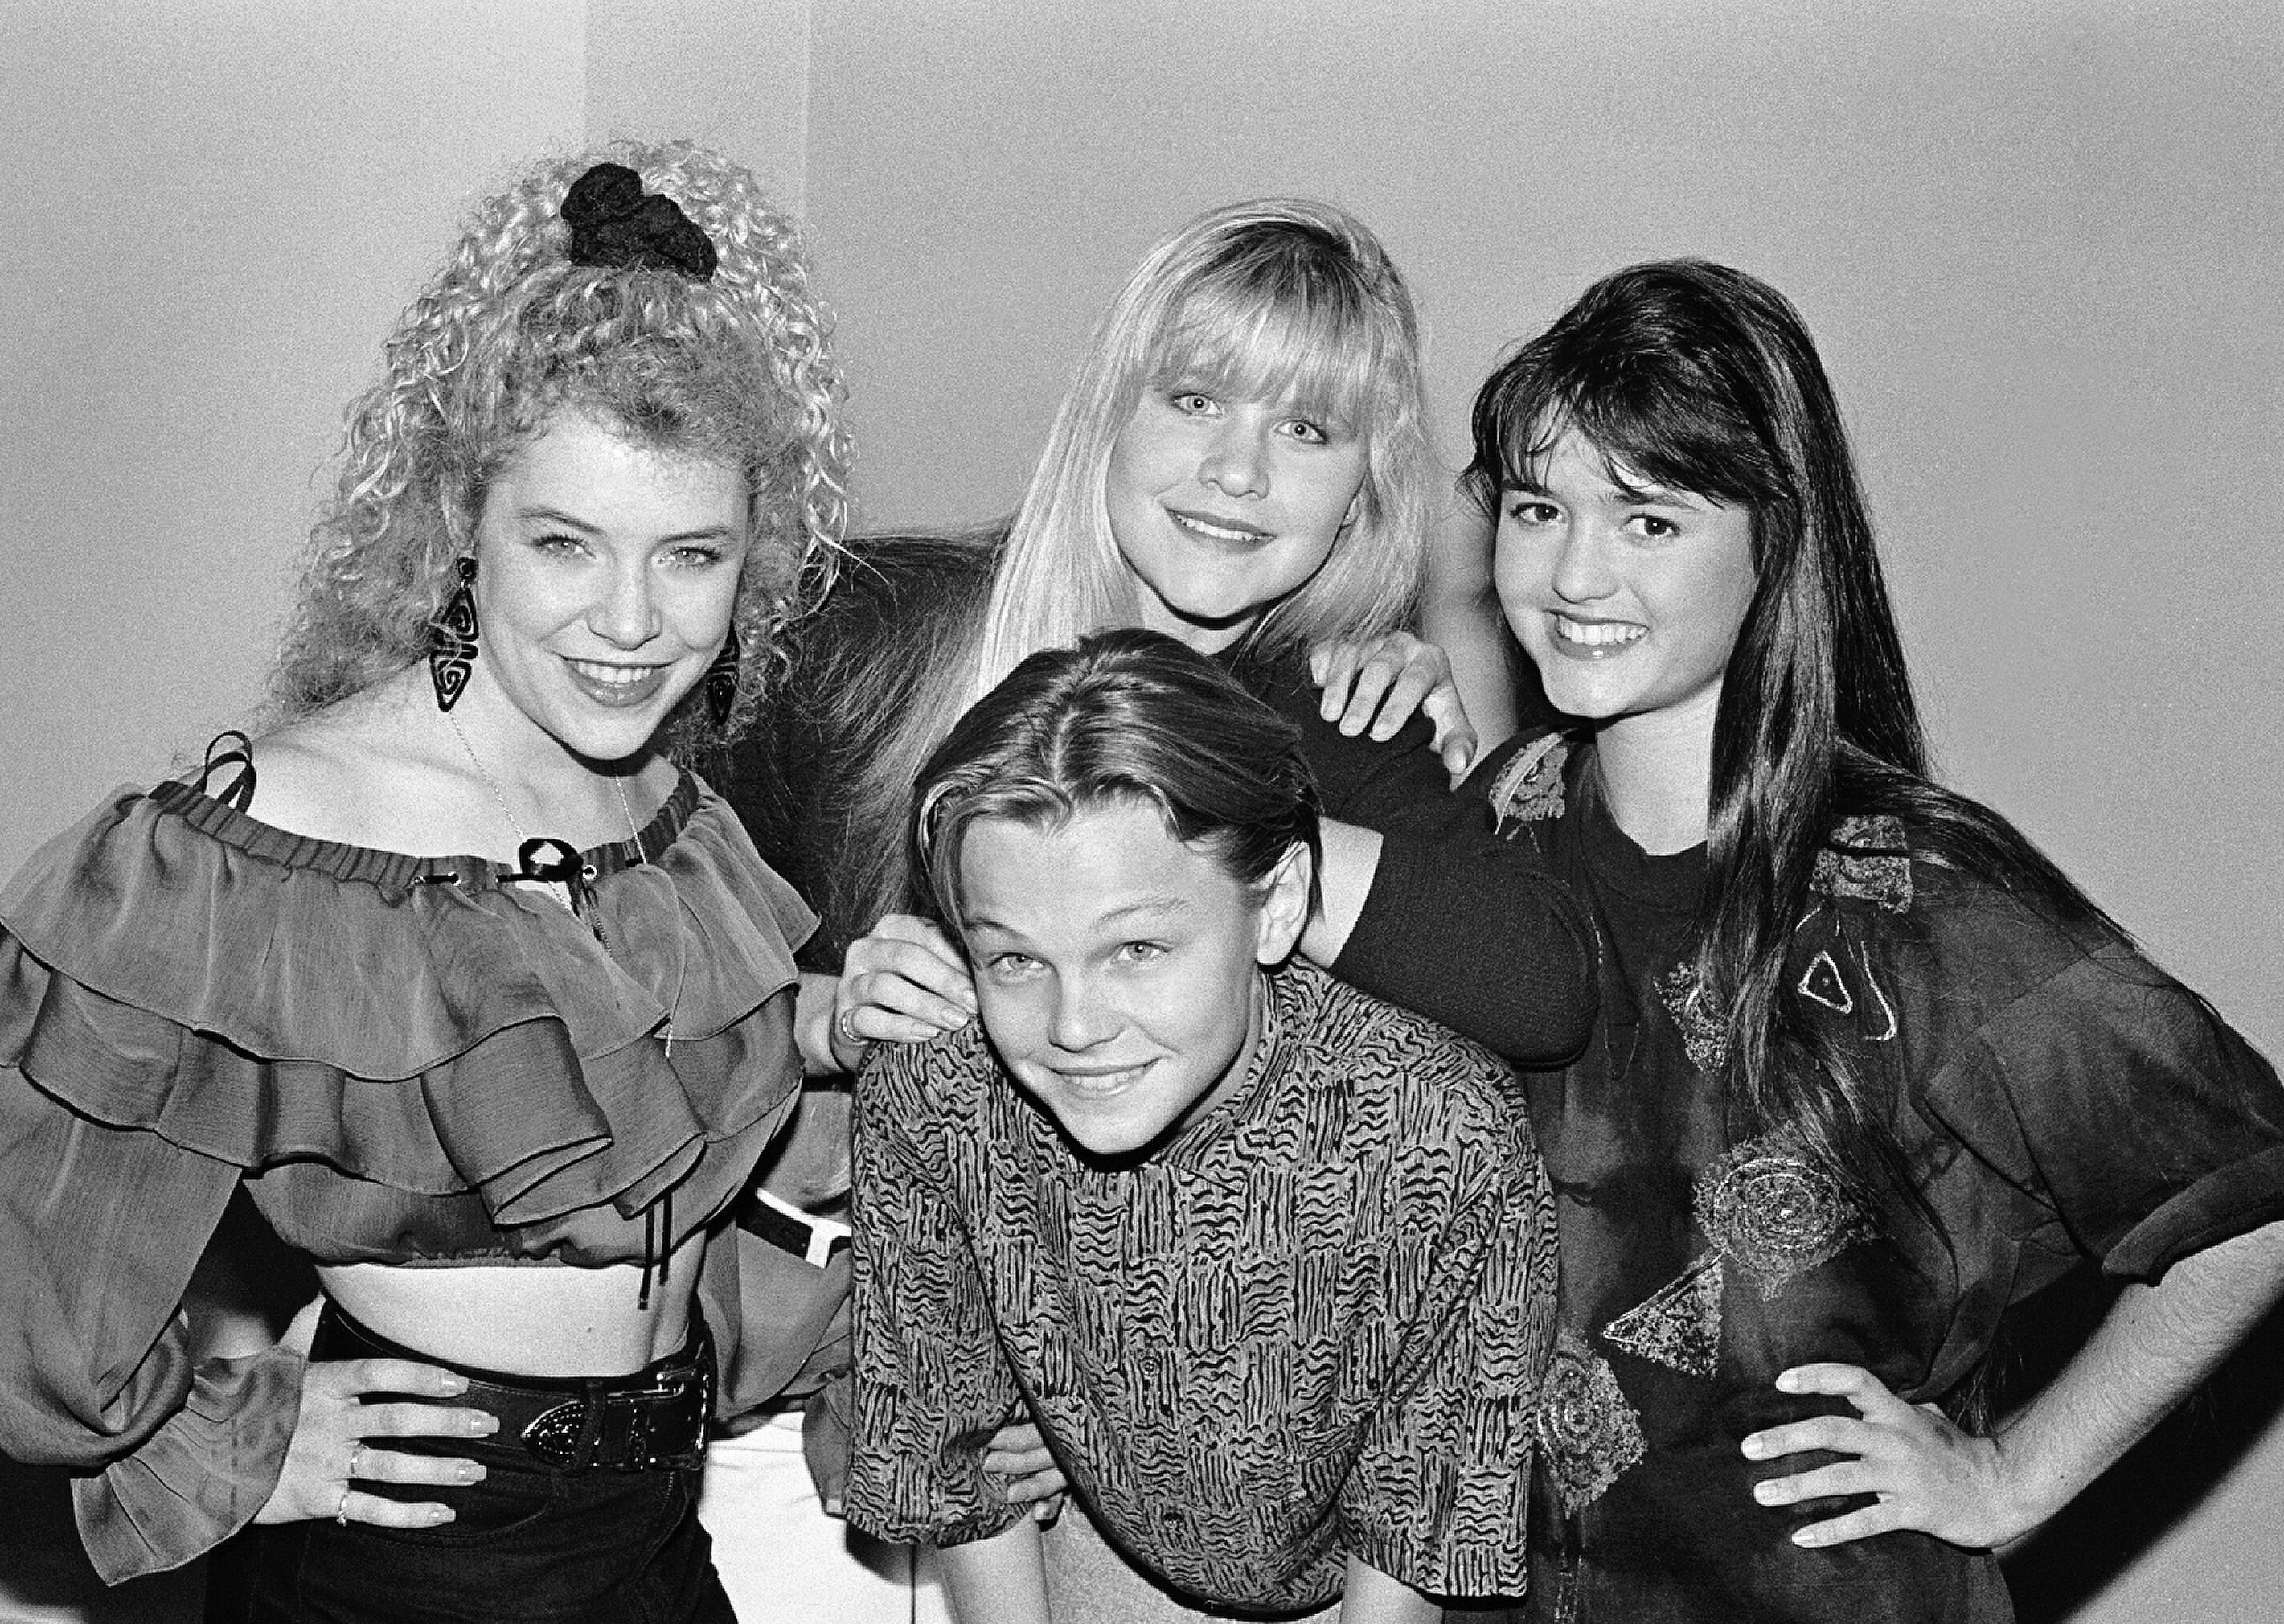 David Plastik Black and White Photograph - Young Leonardo DiCaprio Surrounded by Girls Fine Art Print